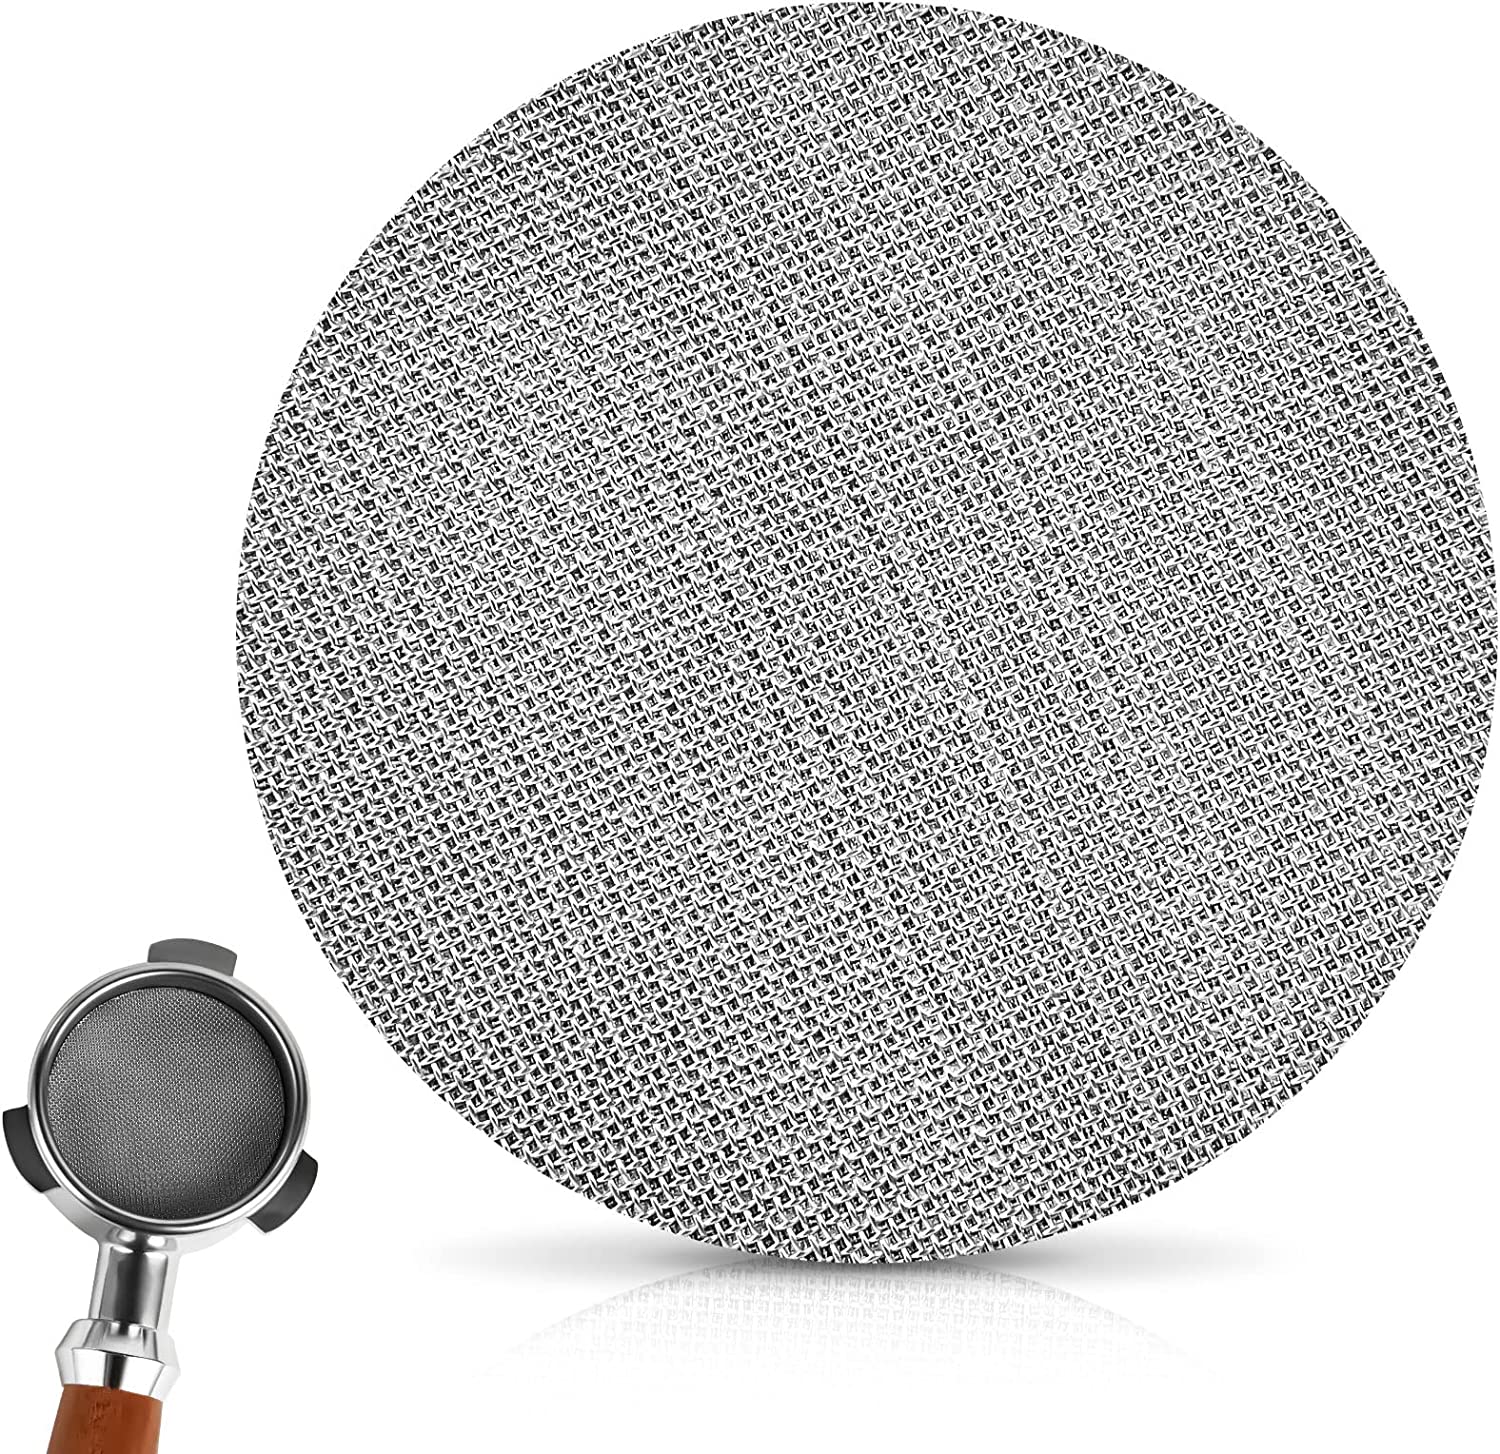 Hotut puck screen 53 mm, espresso puck strainer, coffee filter plate 1.7 mm thickness 150 μm, stainless steel 316l, reusable puck filter for espresso filter holder